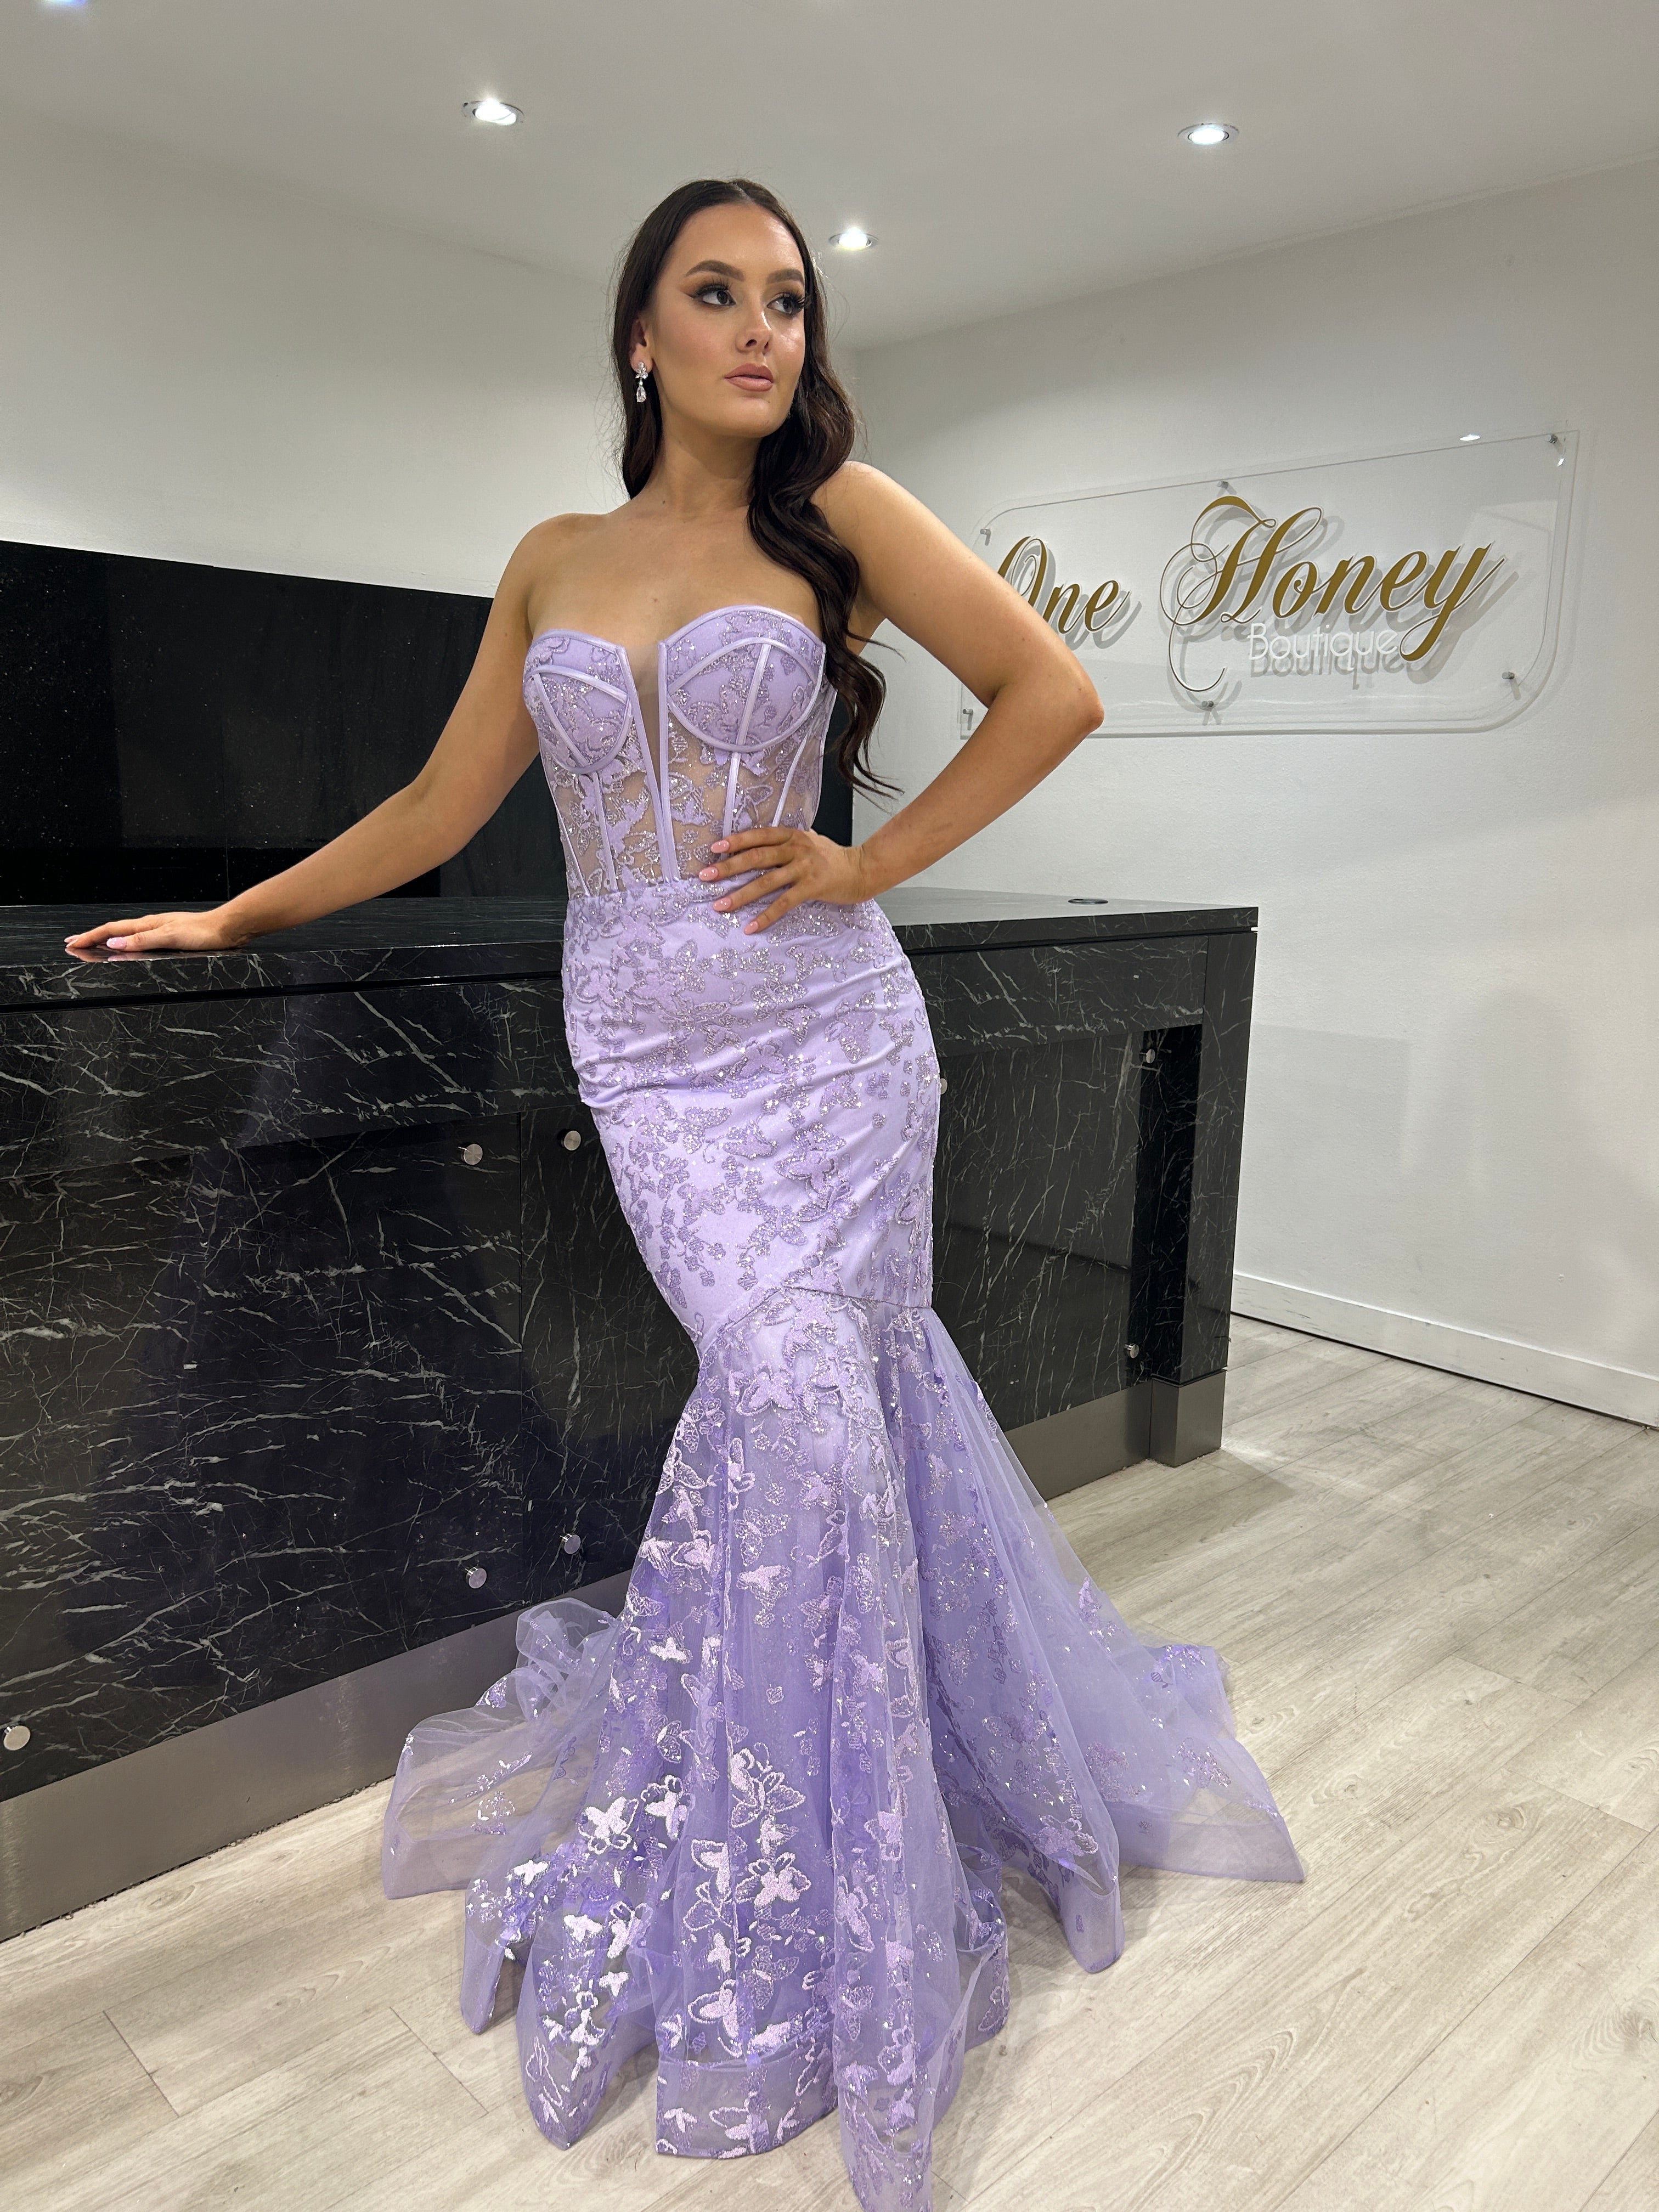 14764 - V-Neck High Low Strapless Satin A-Line Party Dress - CUSTOM COLOR /  US12 | Prom dresses with pockets, High low prom dress, Prom dresses